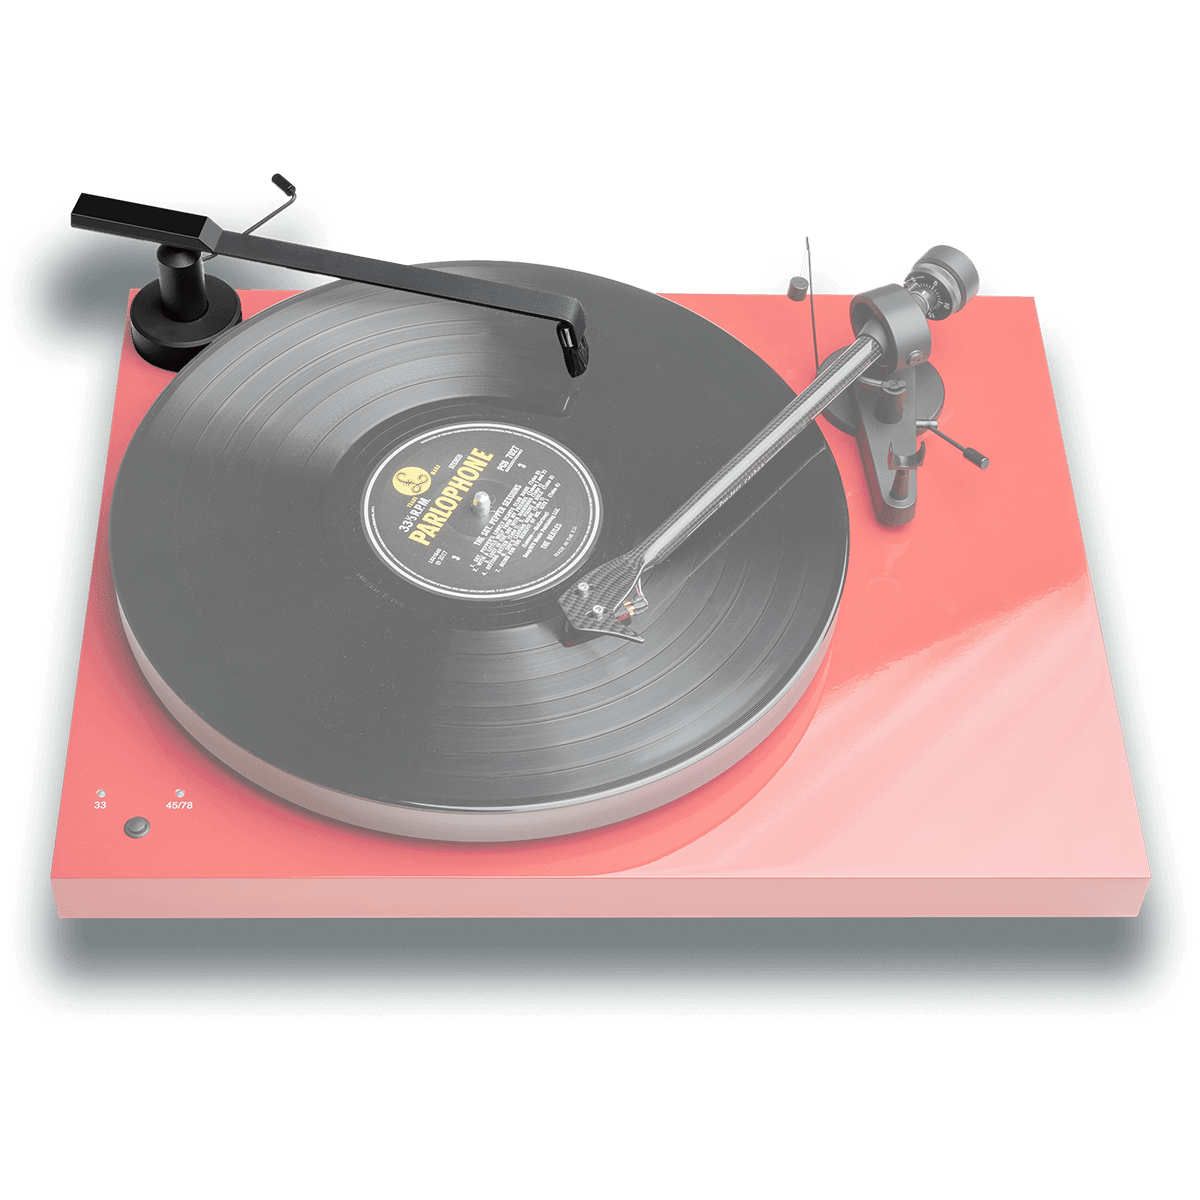 Pro-Ject Sweep It S2 Record Brush, Black, set up on a Pro-Ject Debut turntable